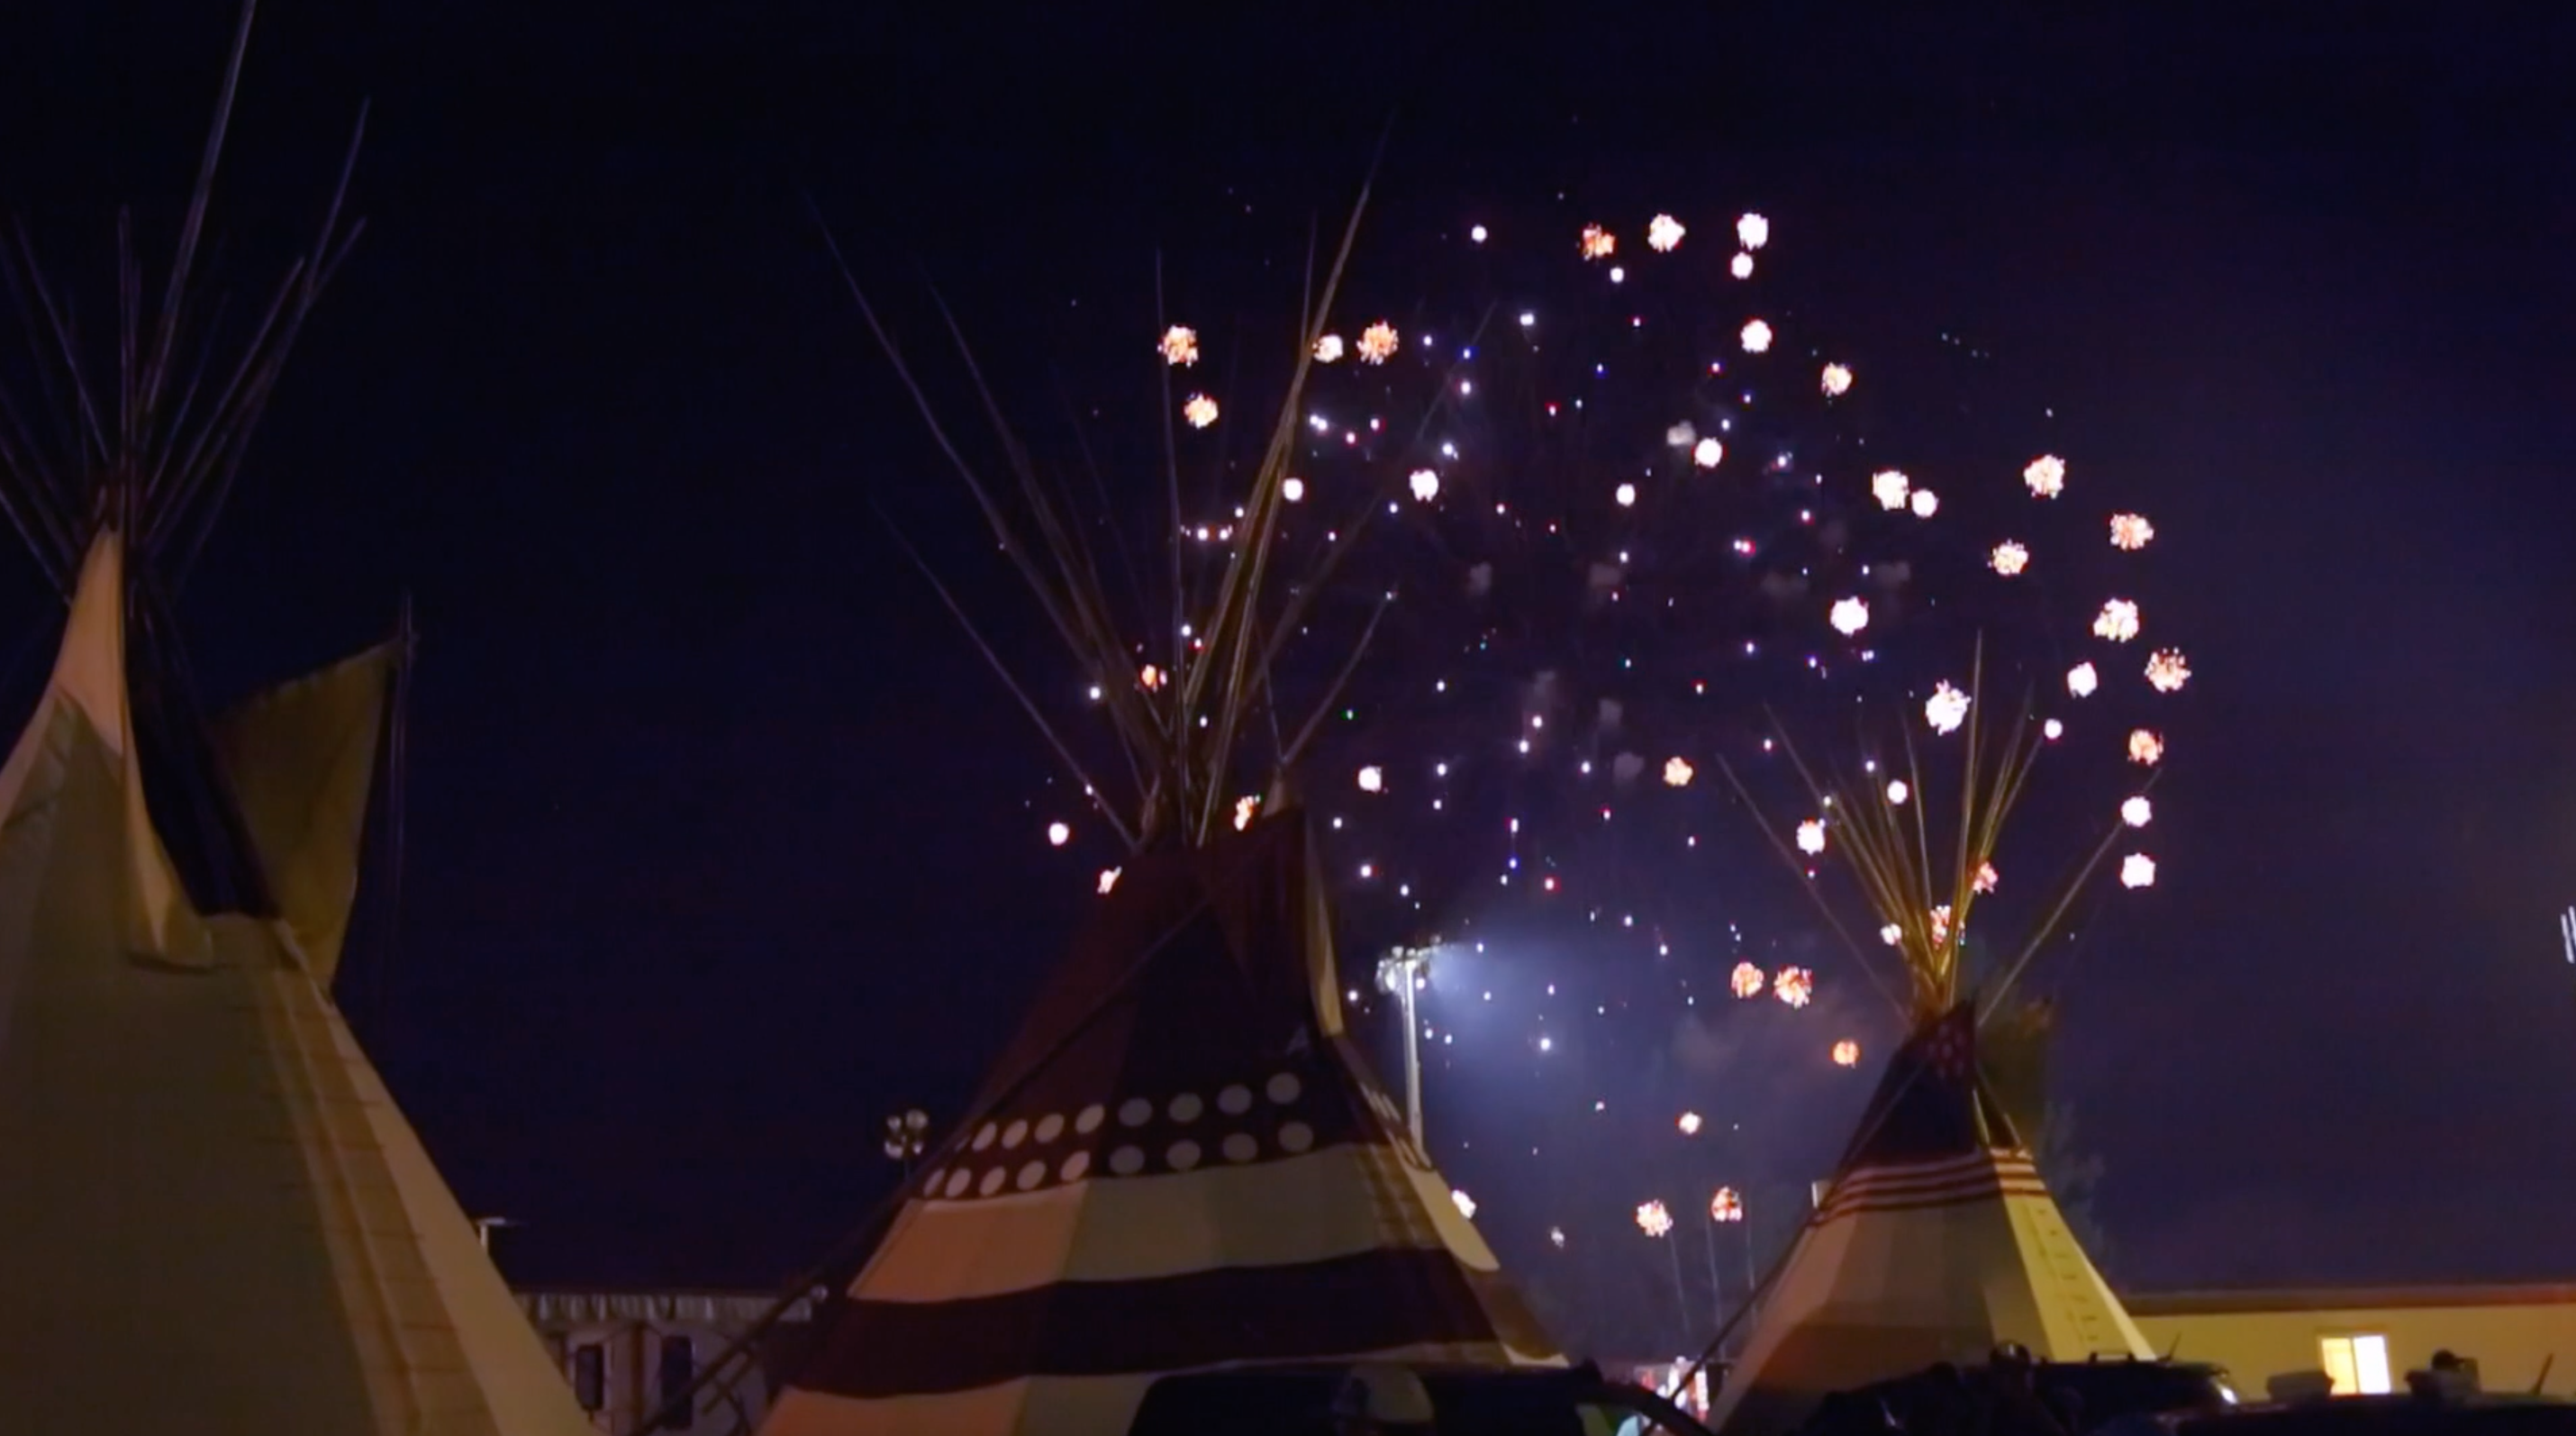 Fireworks going off in the night over teepees